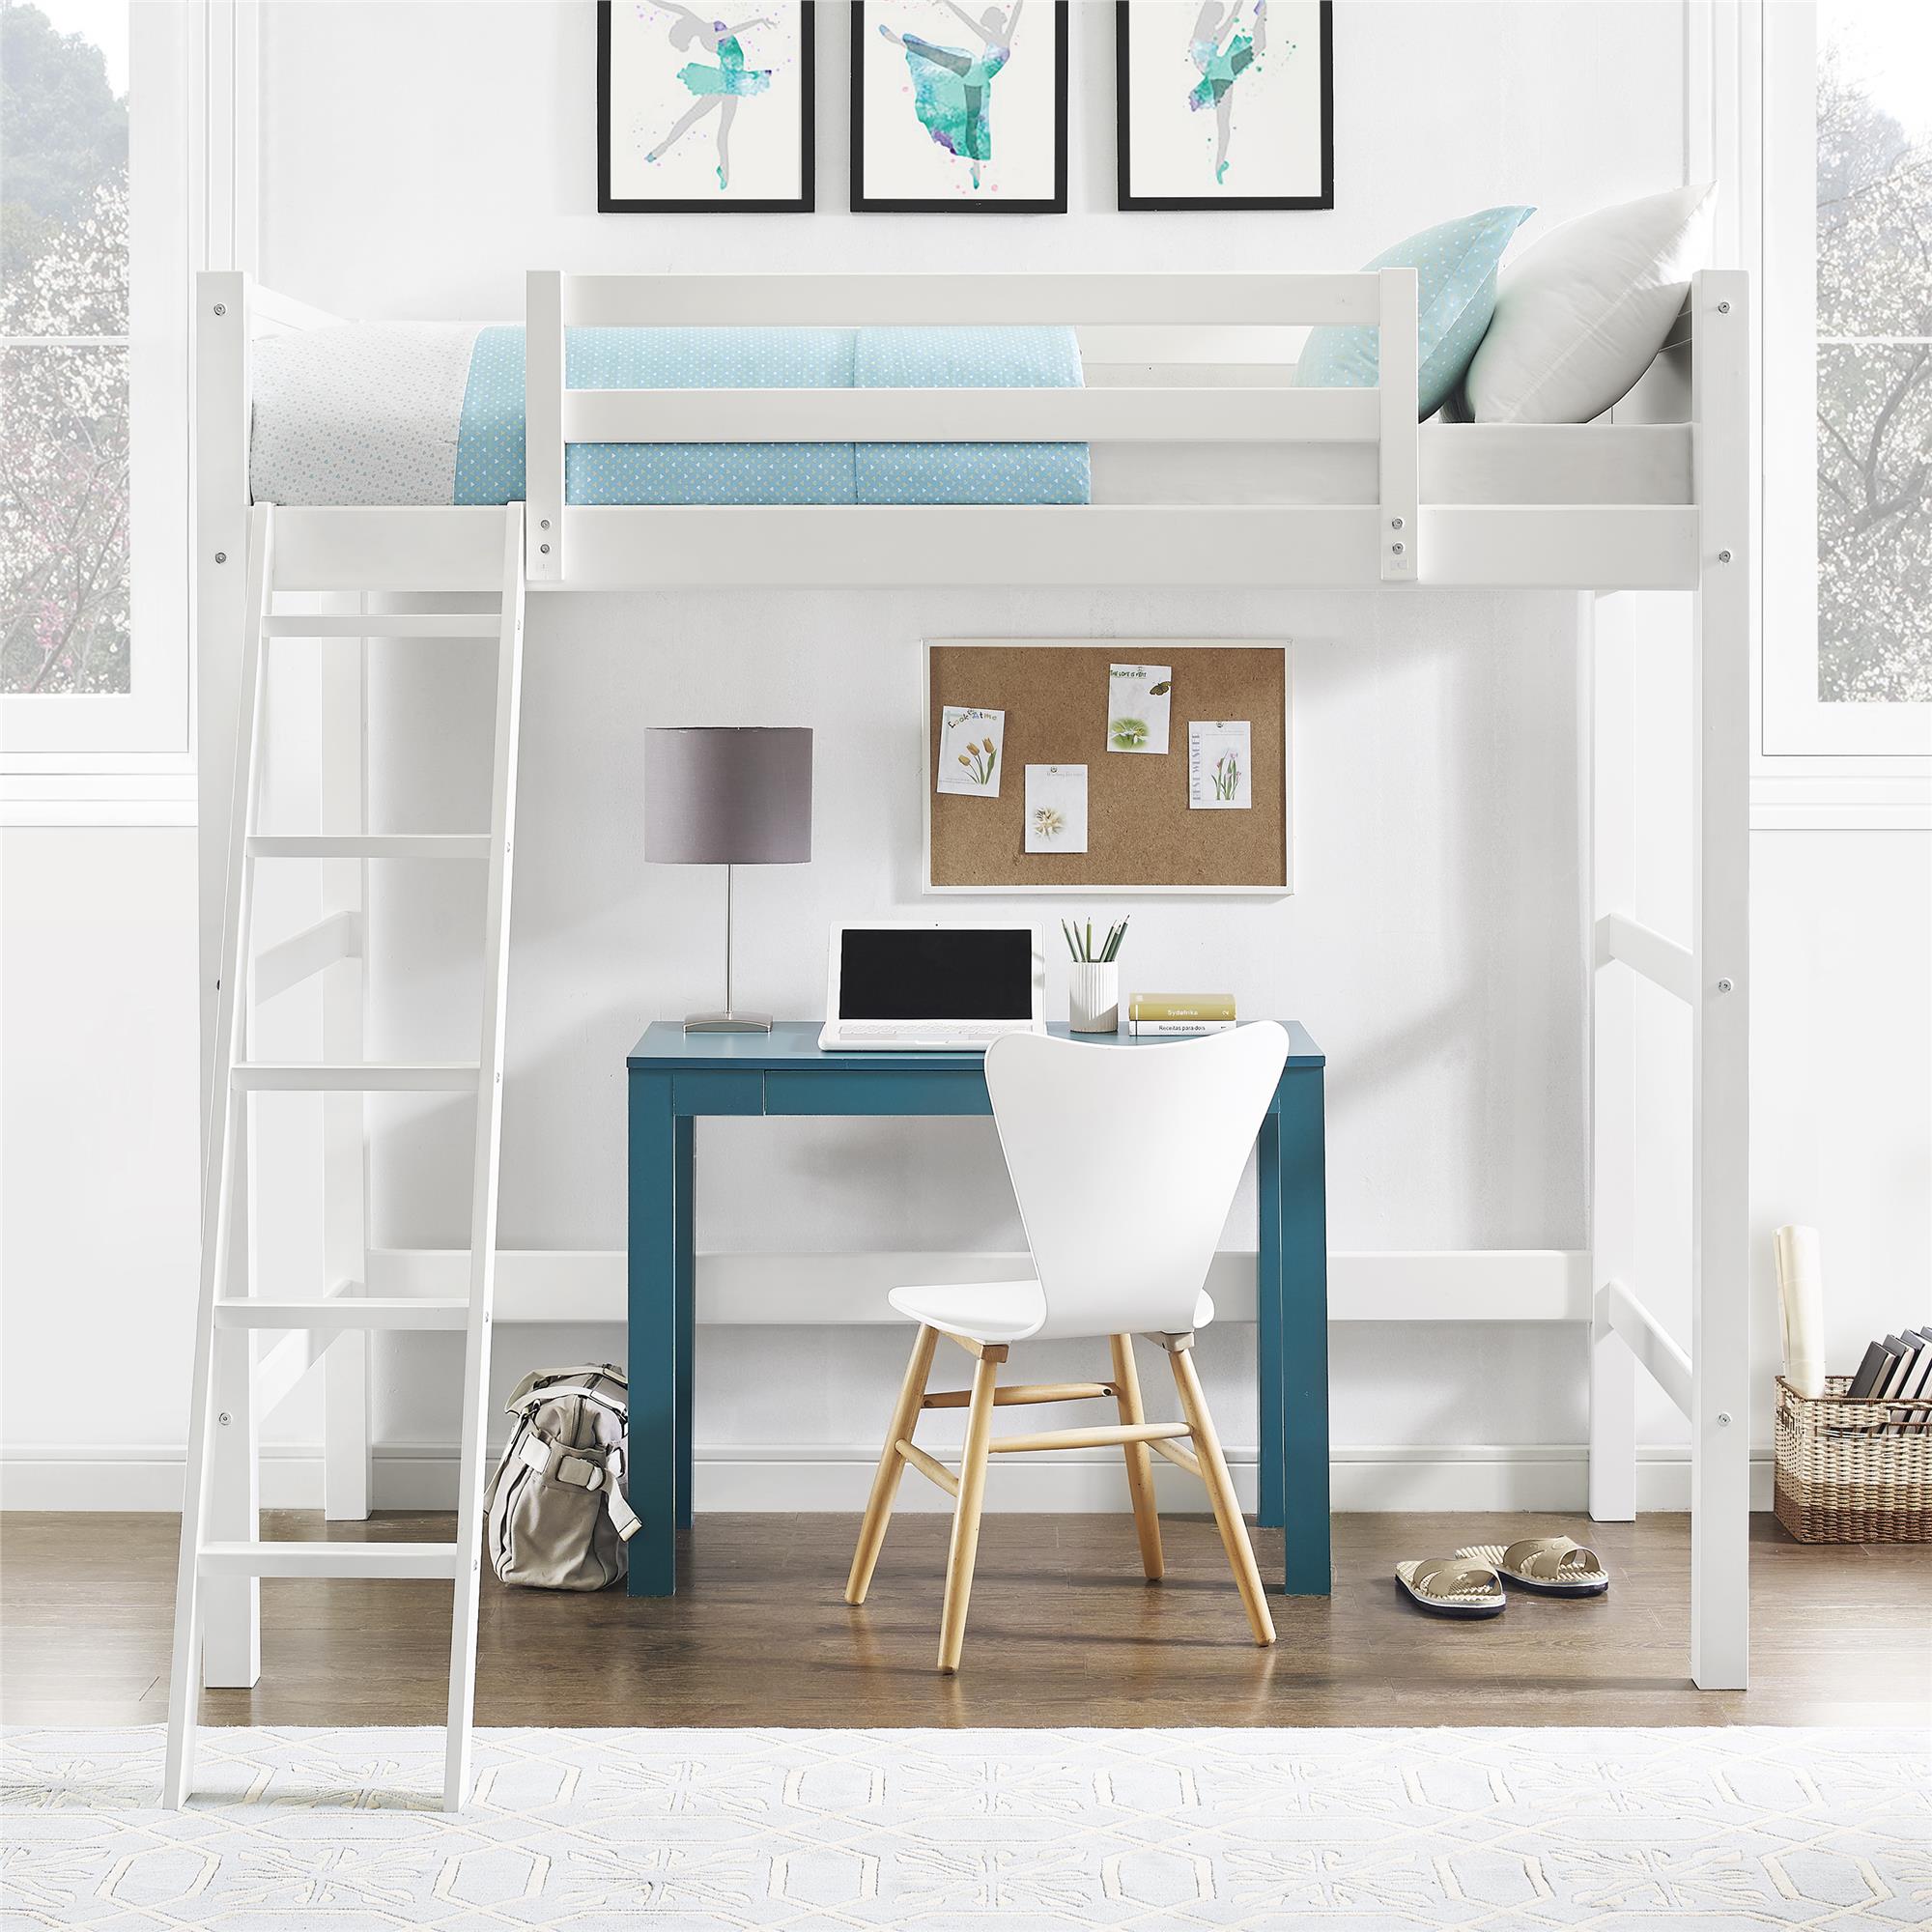 Your Zone Kiarah Twin Loft Bed with Ladder, White - image 2 of 18